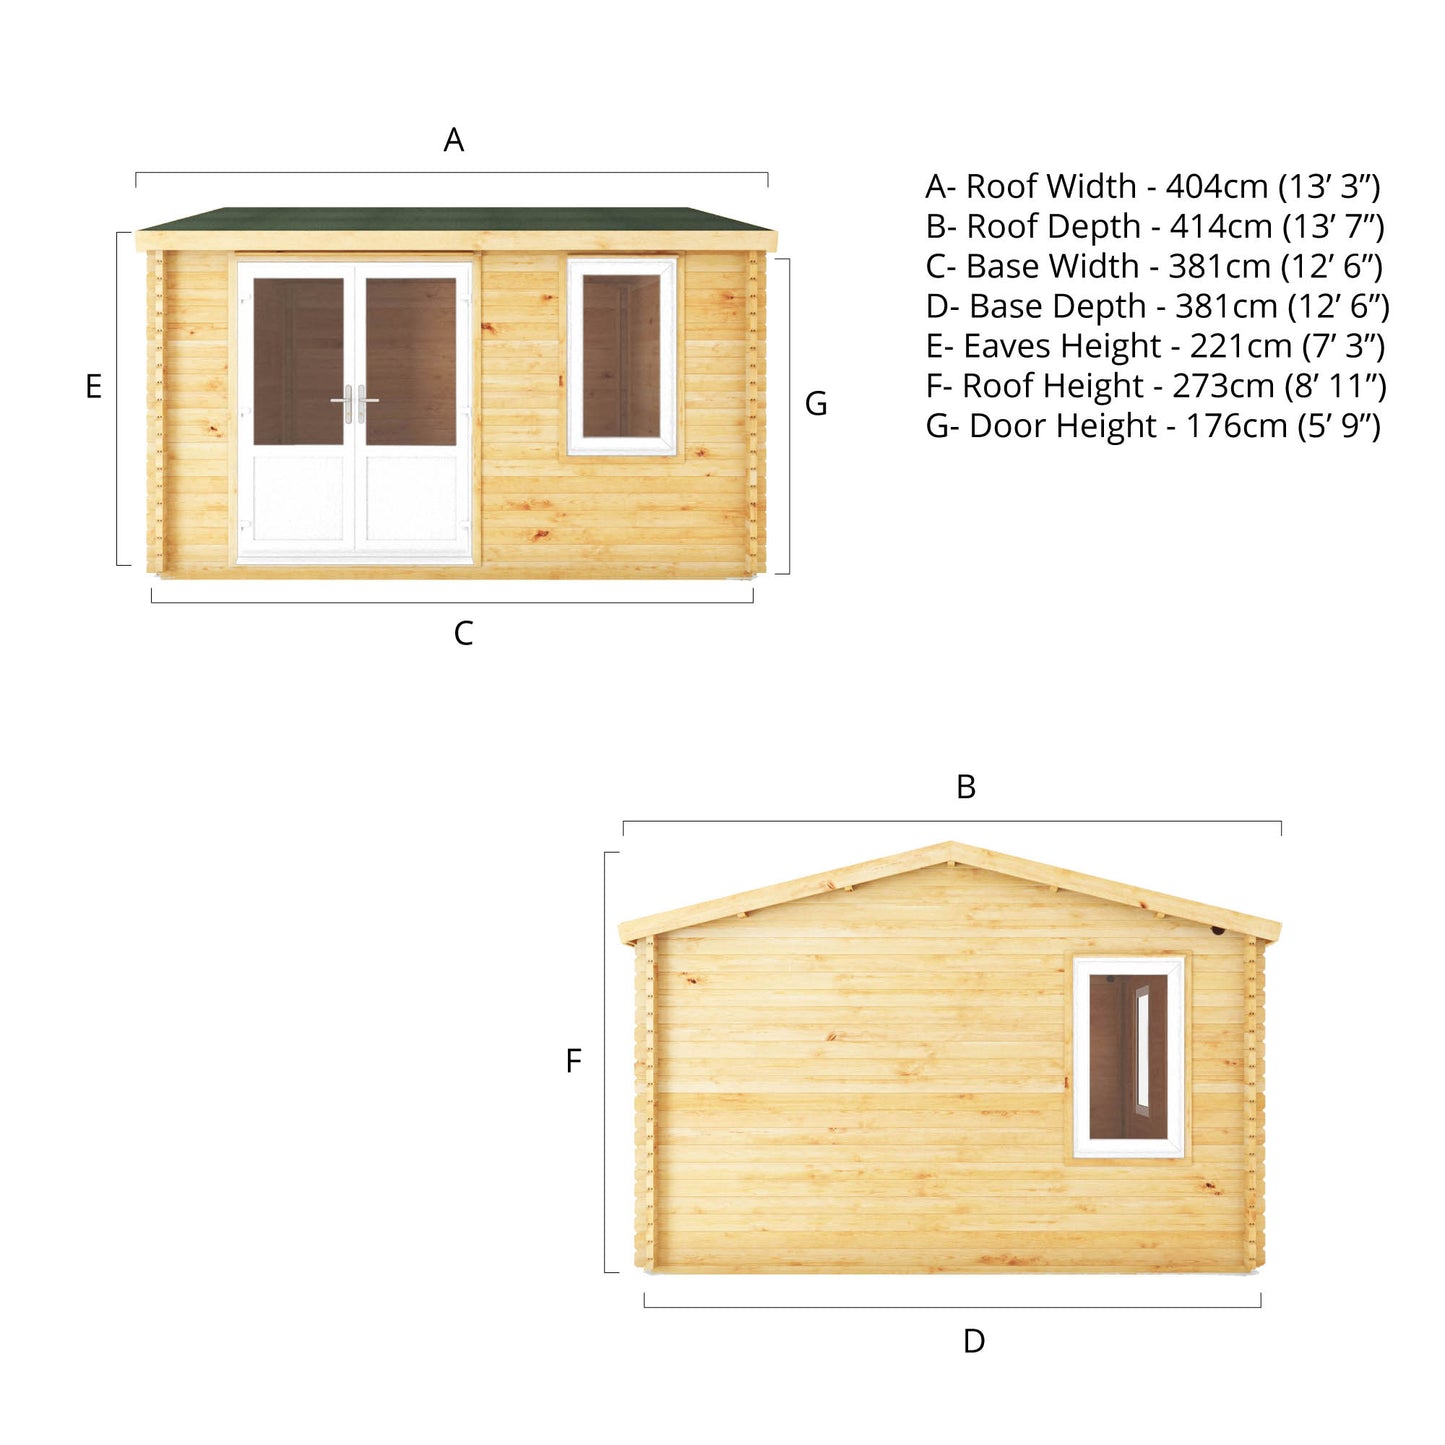 The 4m x 4m Robin Log Cabin with White UPVC